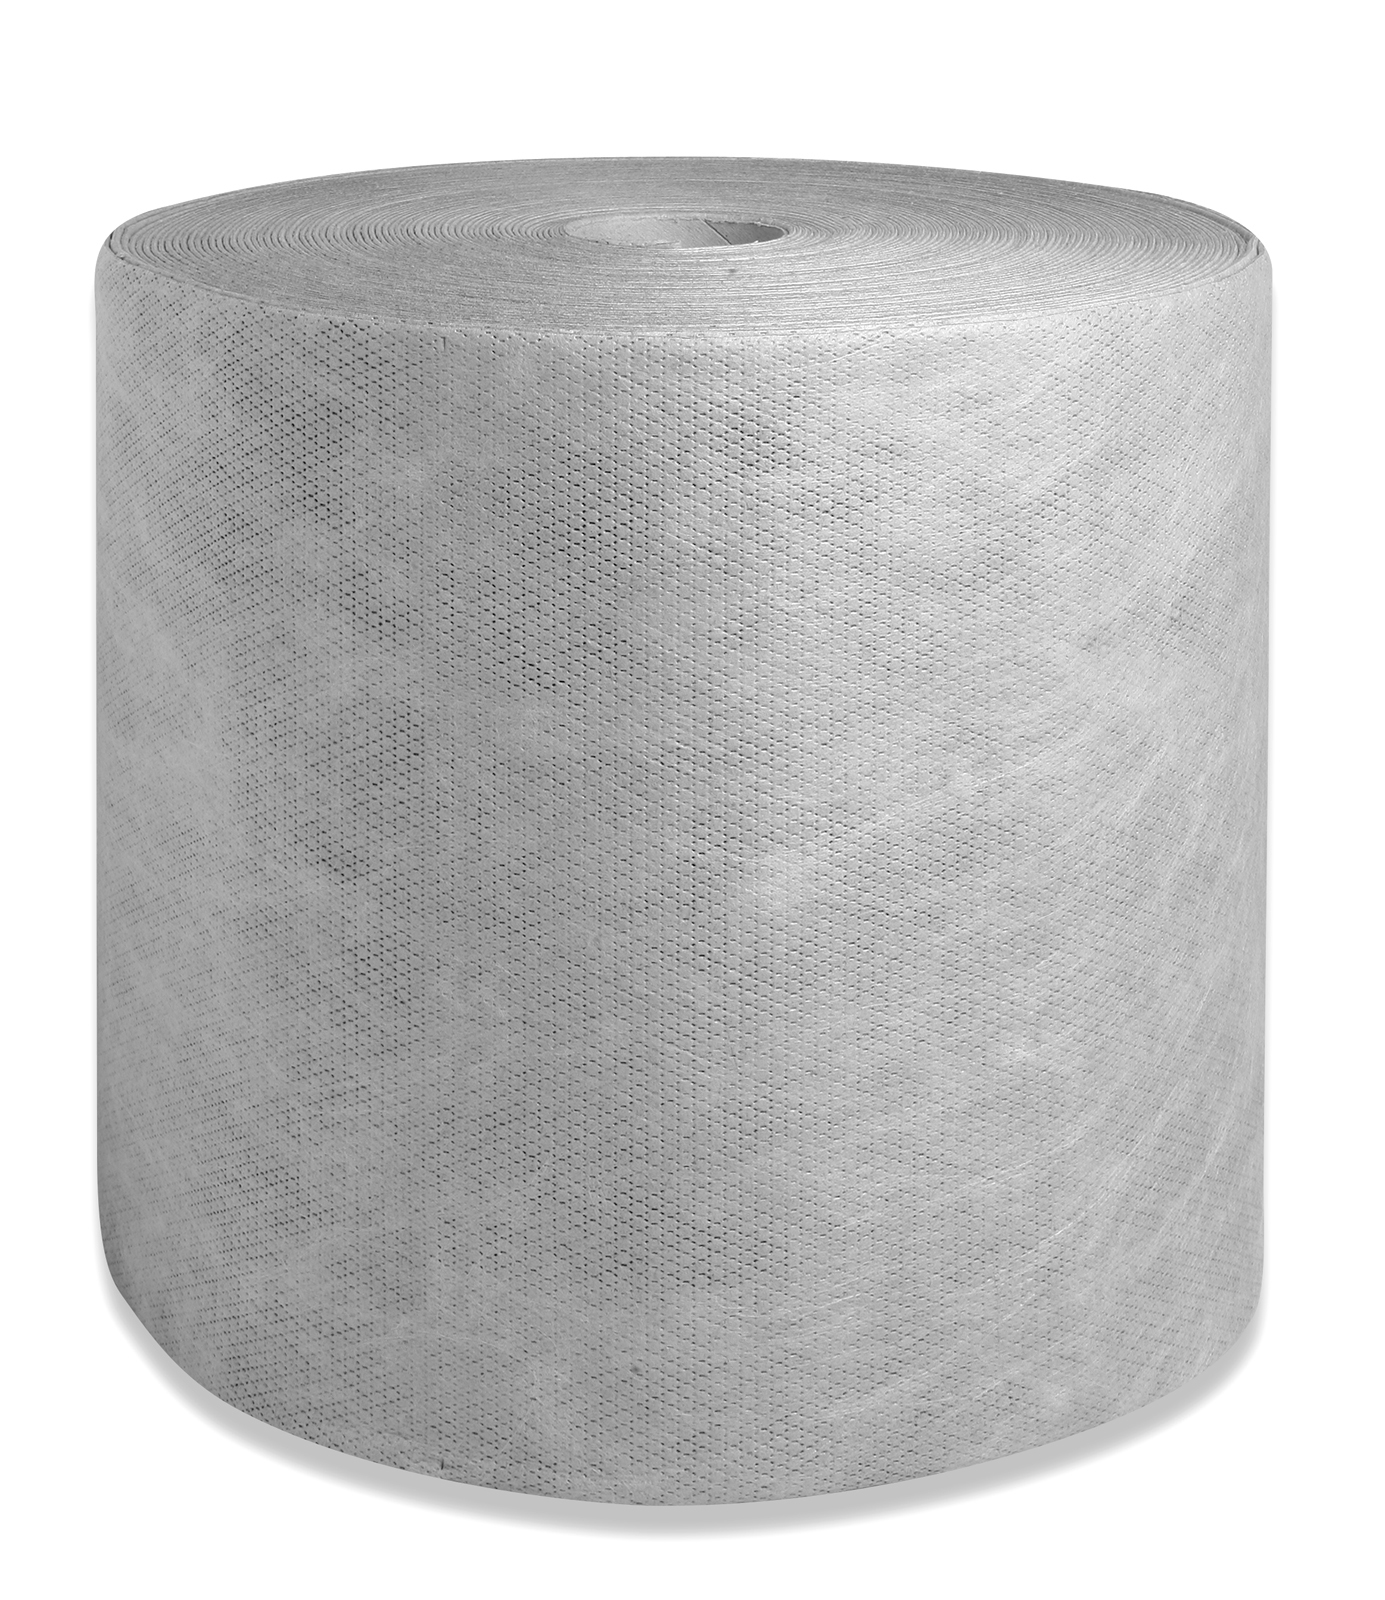 ICOSORB&#174; FIRST LIGHT gray as a roll